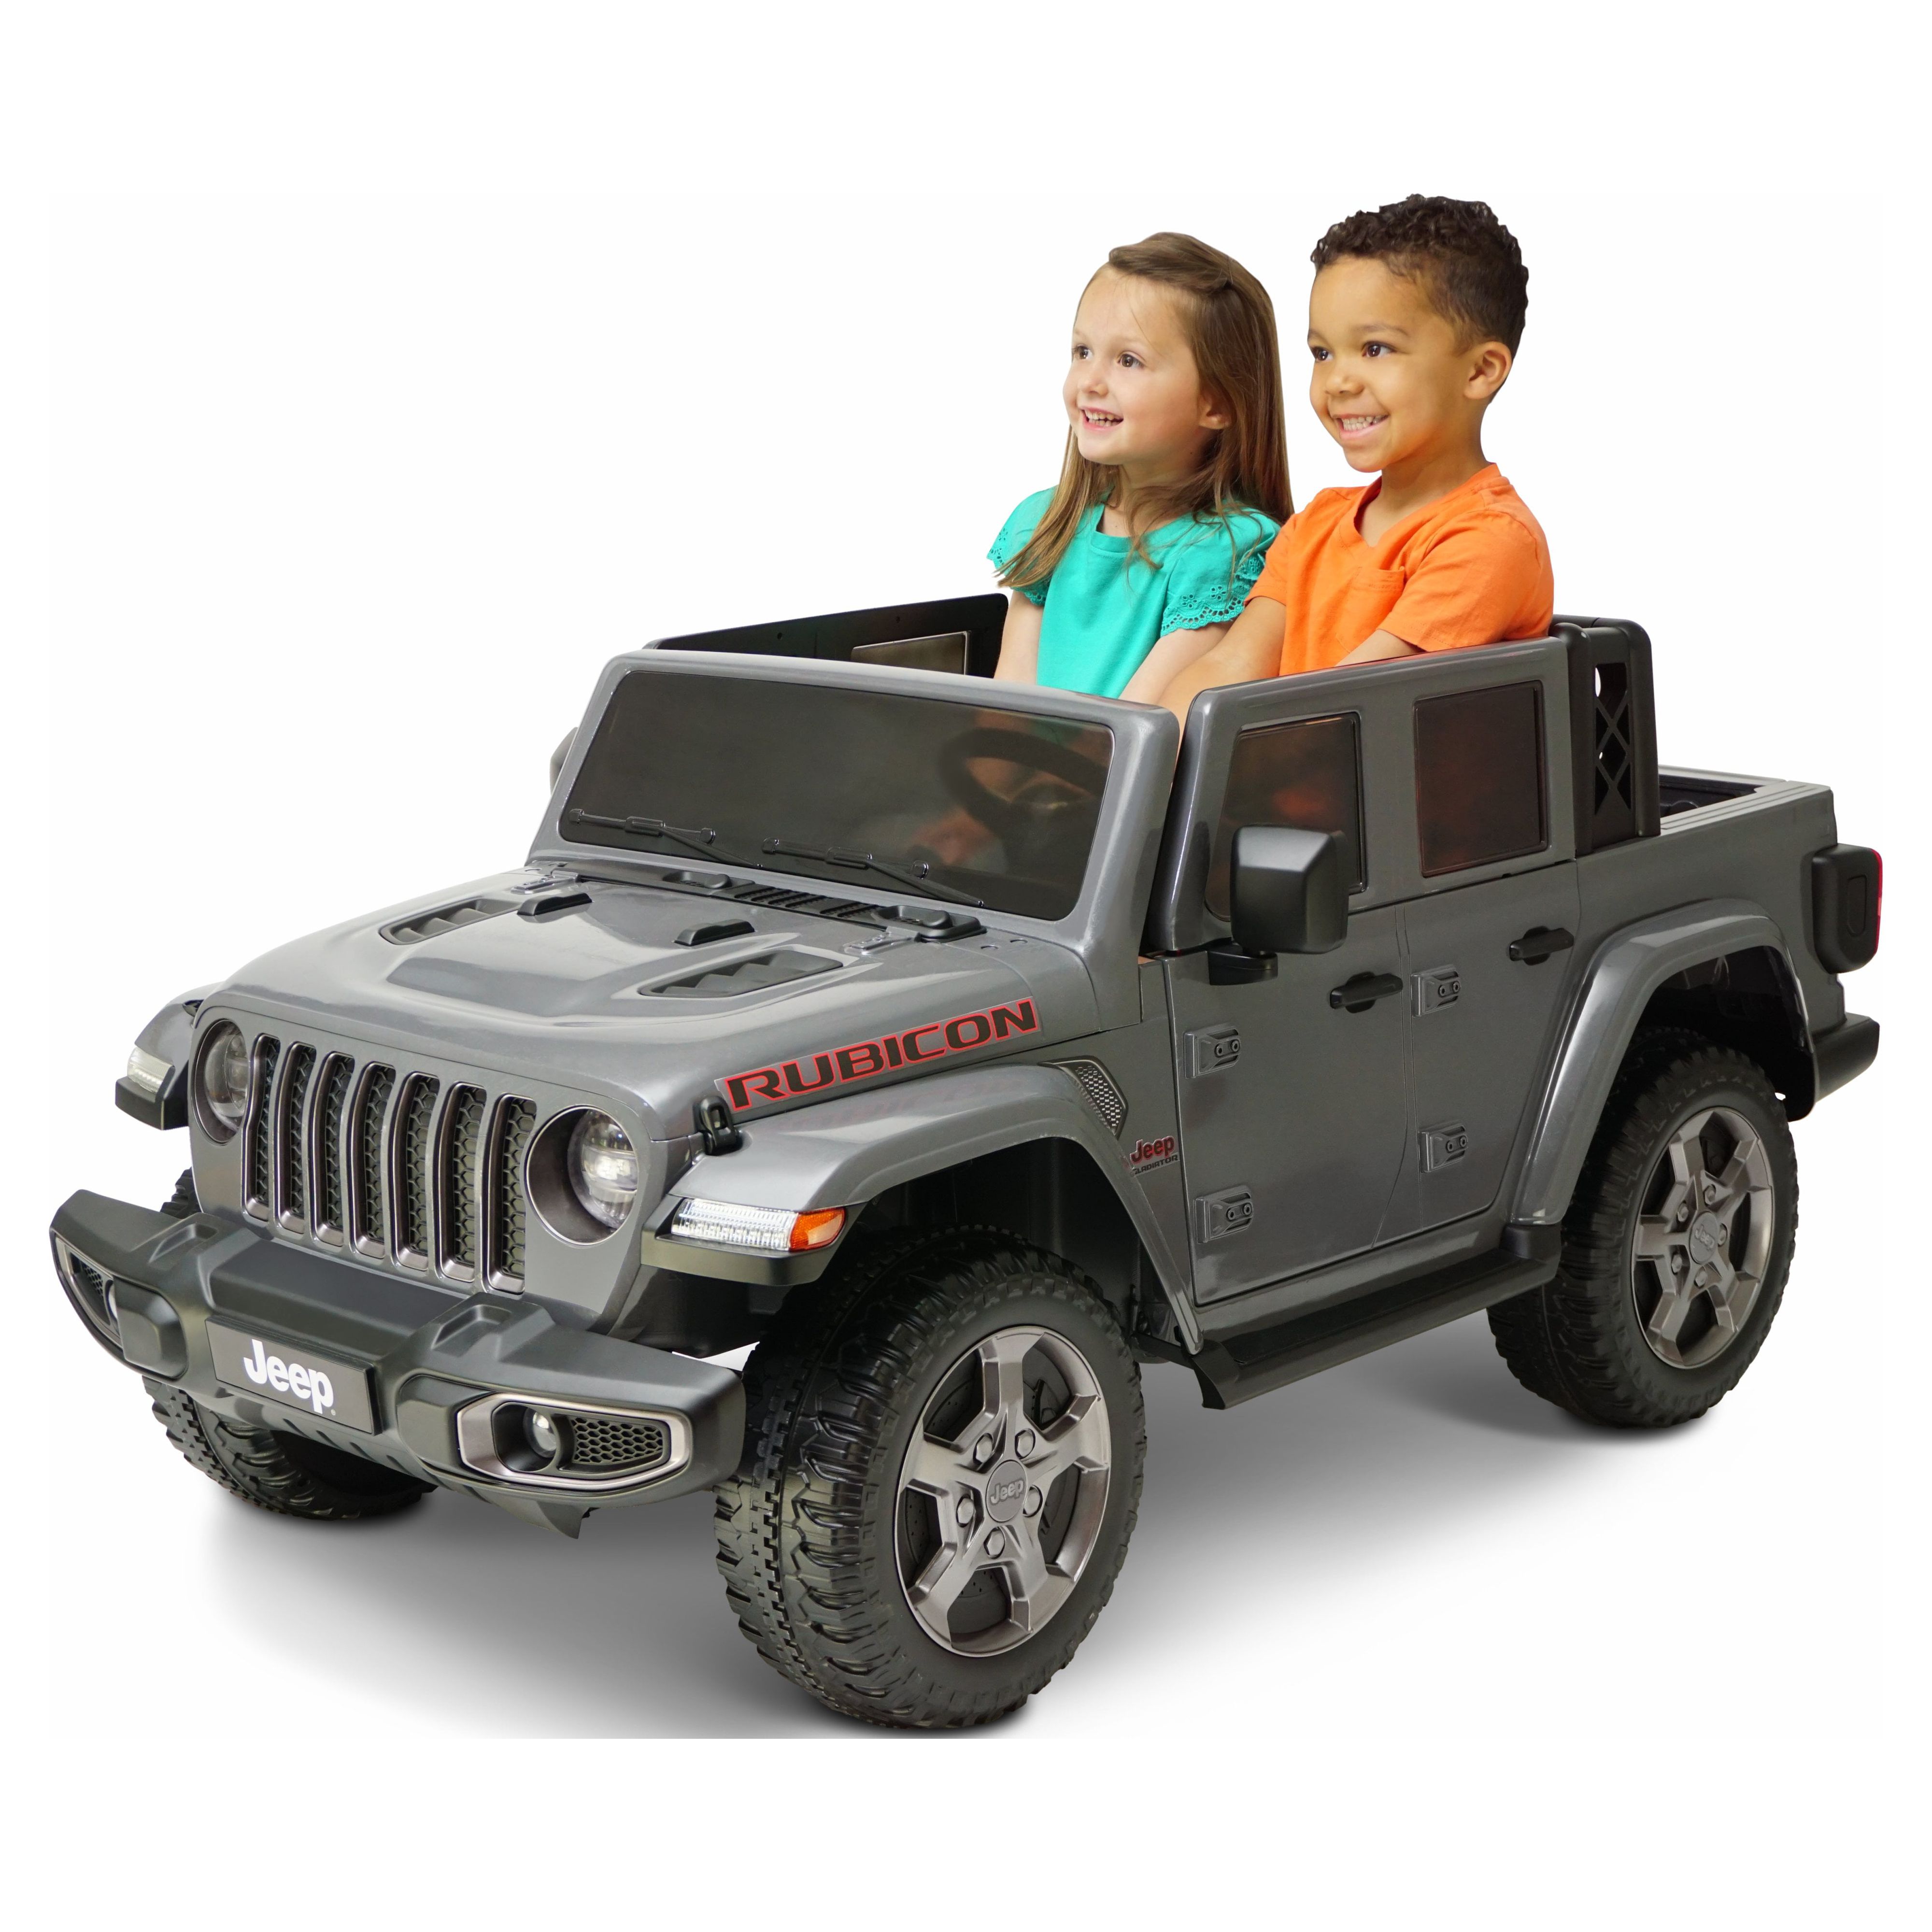 12V Jeep Gladiator Rubicon Battery Powered Ride-on by Hyper Toys, 2-Seater, Gray, for a Child Ages 3-8, Max Speed 5 mph - image 1 of 15